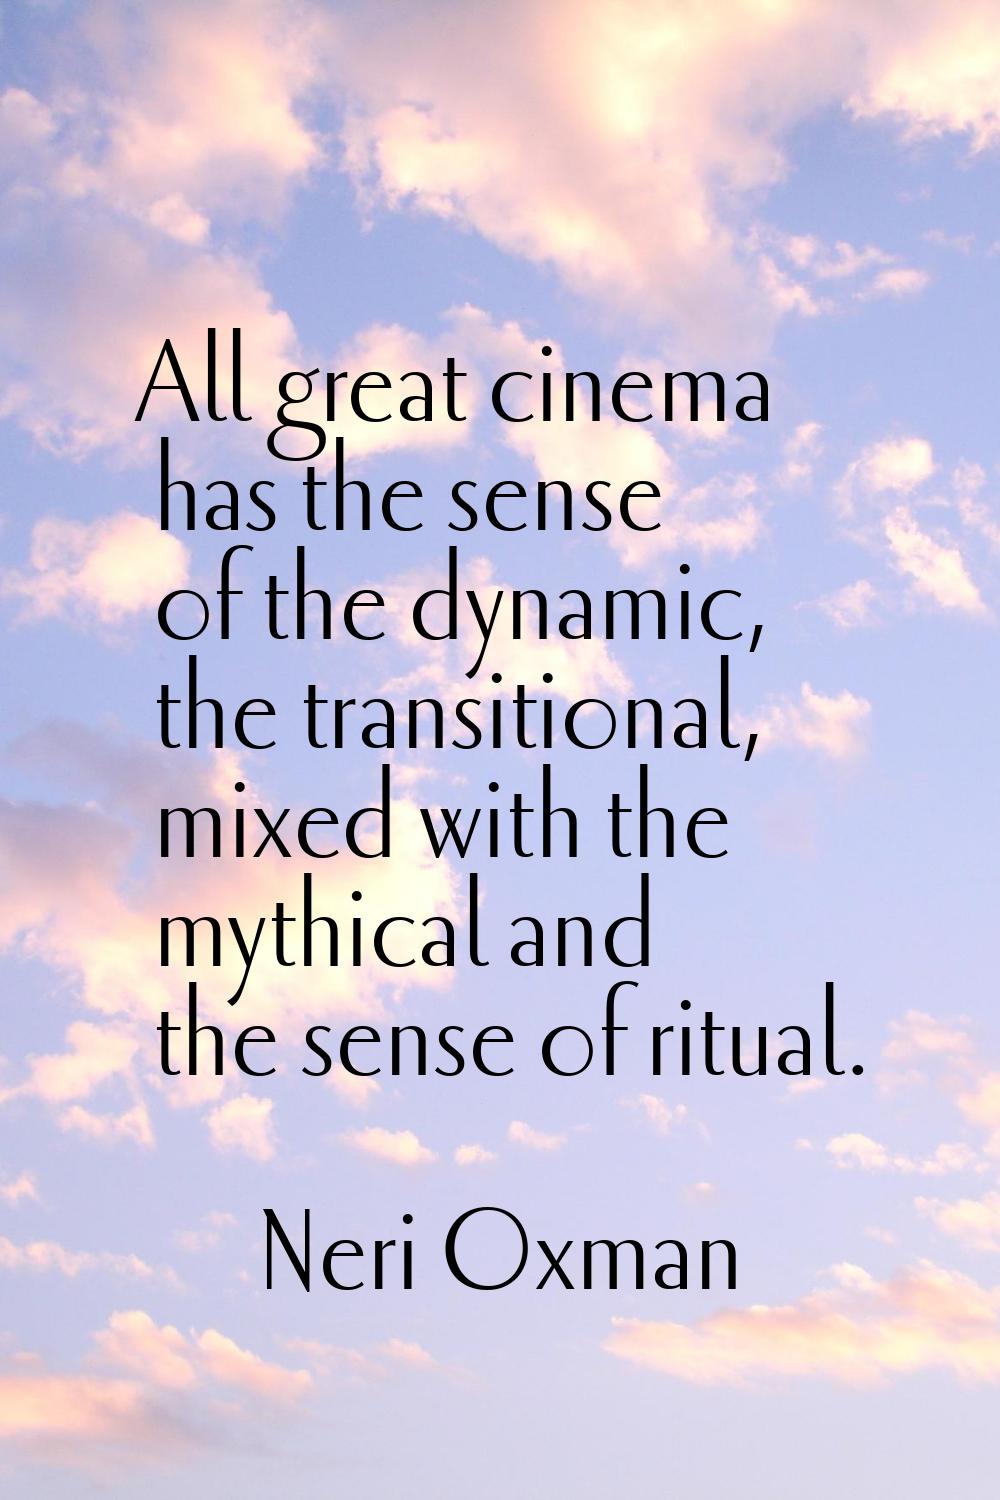 All great cinema has the sense of the dynamic, the transitional, mixed with the mythical and the se